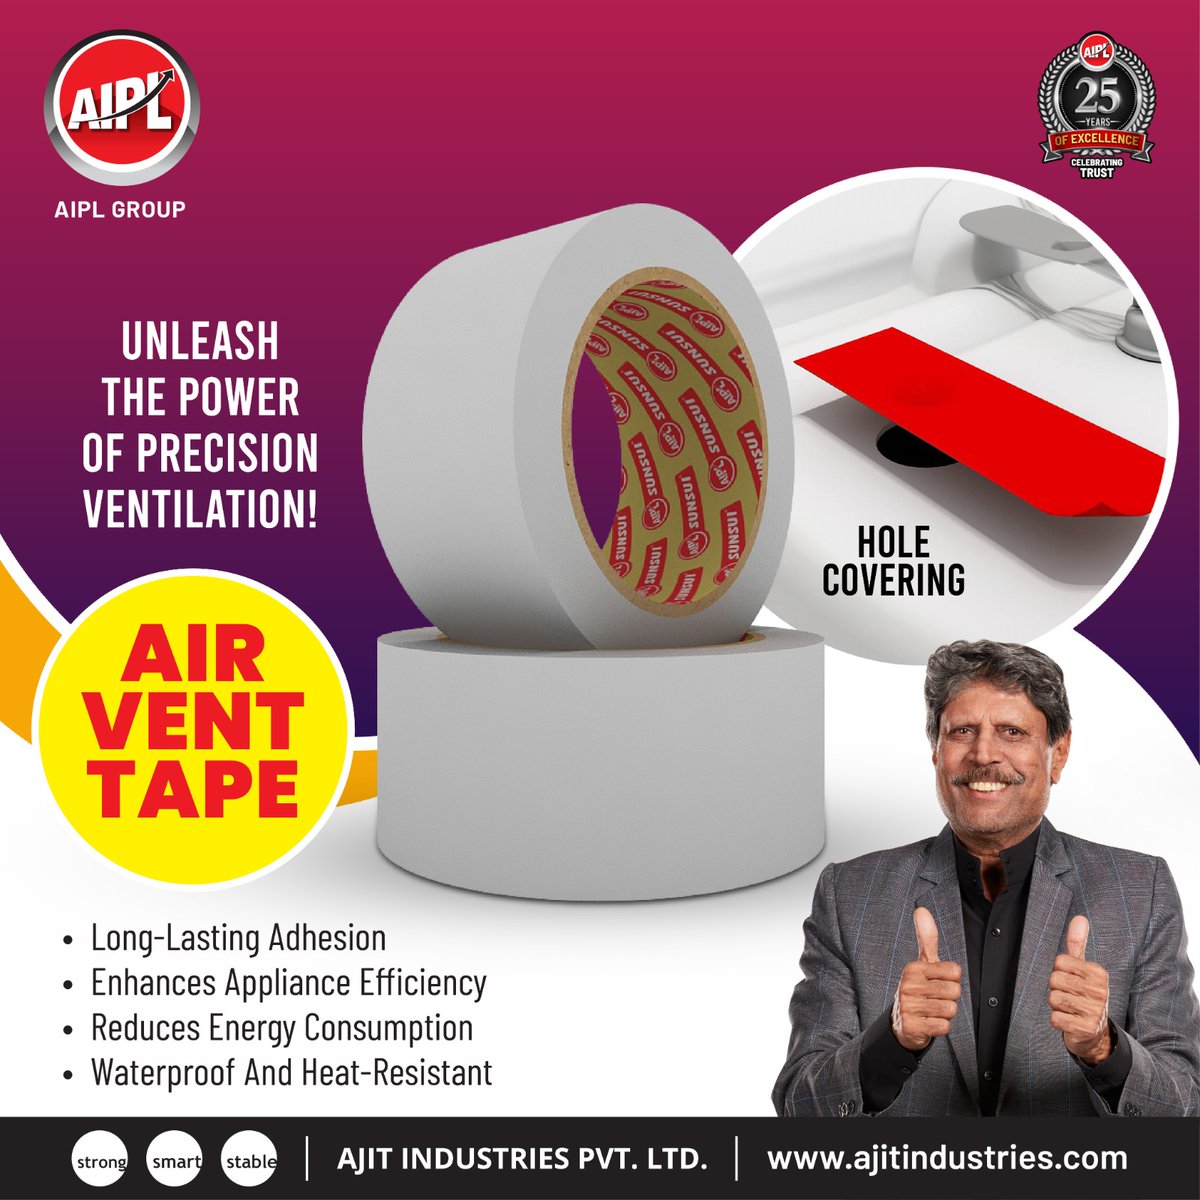 The secret weapon for optimal performance and durability! Say goodbye to pesky leaks and hello to seamless functionality.

#AIPLGroup #Ajitindustries #WhiteGoods #AirVentTape #PerformanceBoost